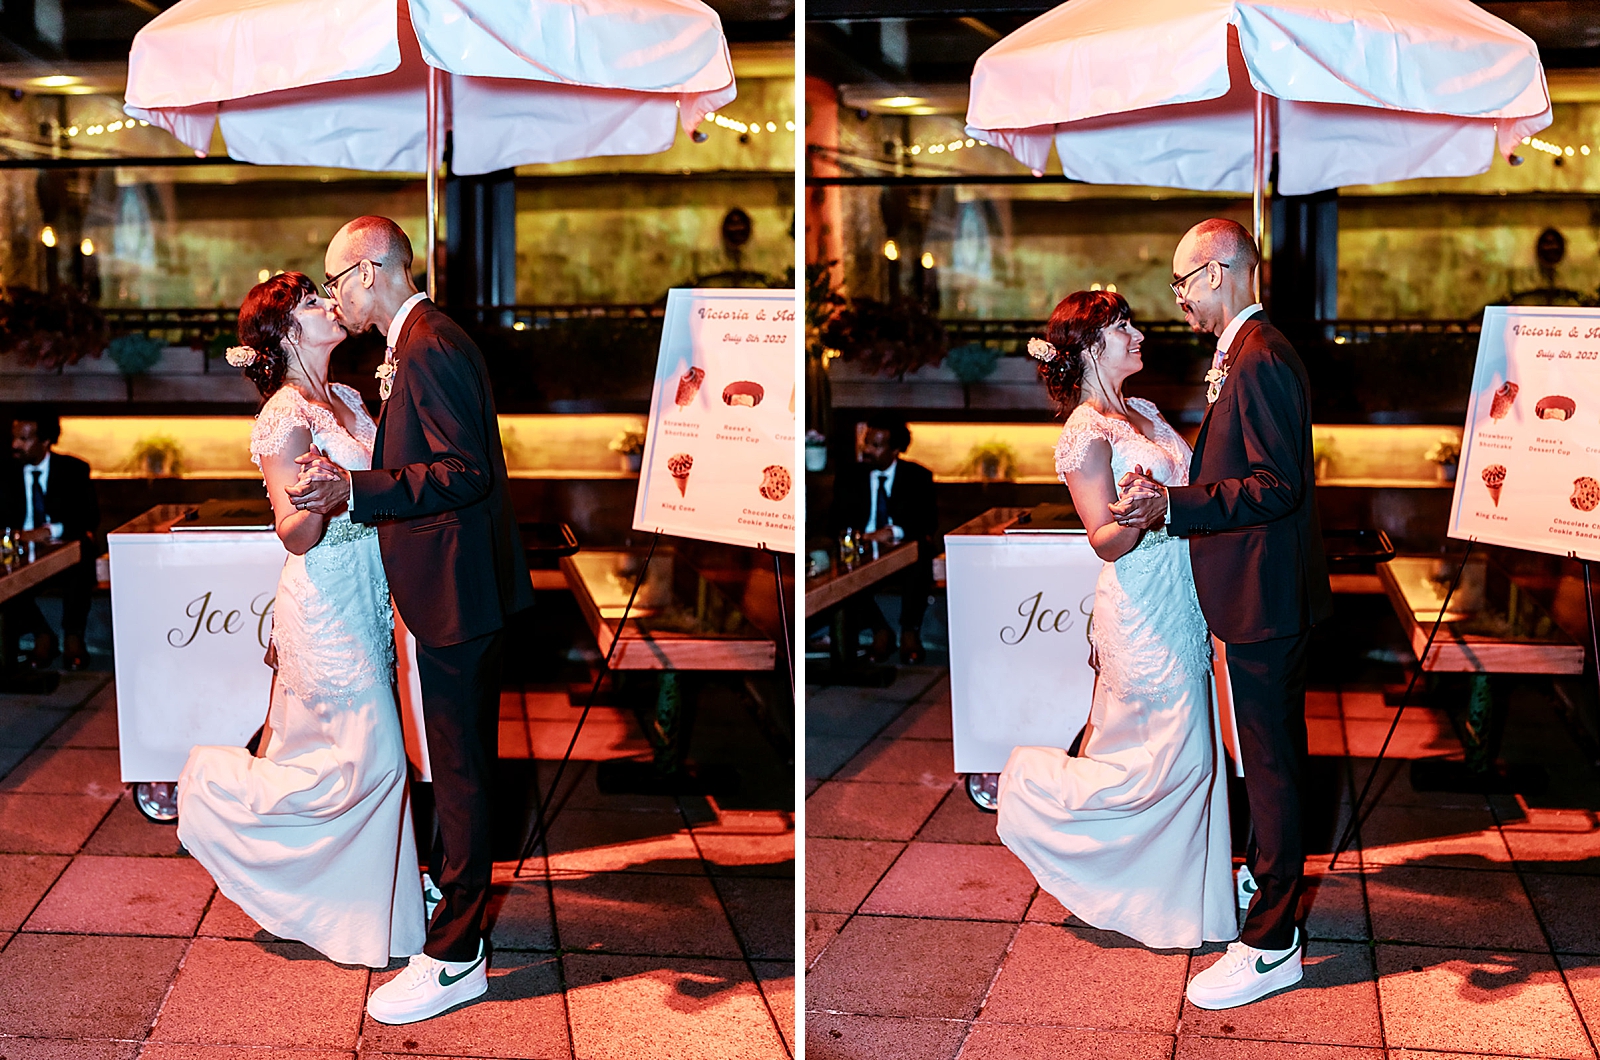 Left photo: Shot of the couple sharing a kiss in front of an ice cream cart. 
Right photo: Shot of the couple smiling at each other in front of an ice cream cart. 